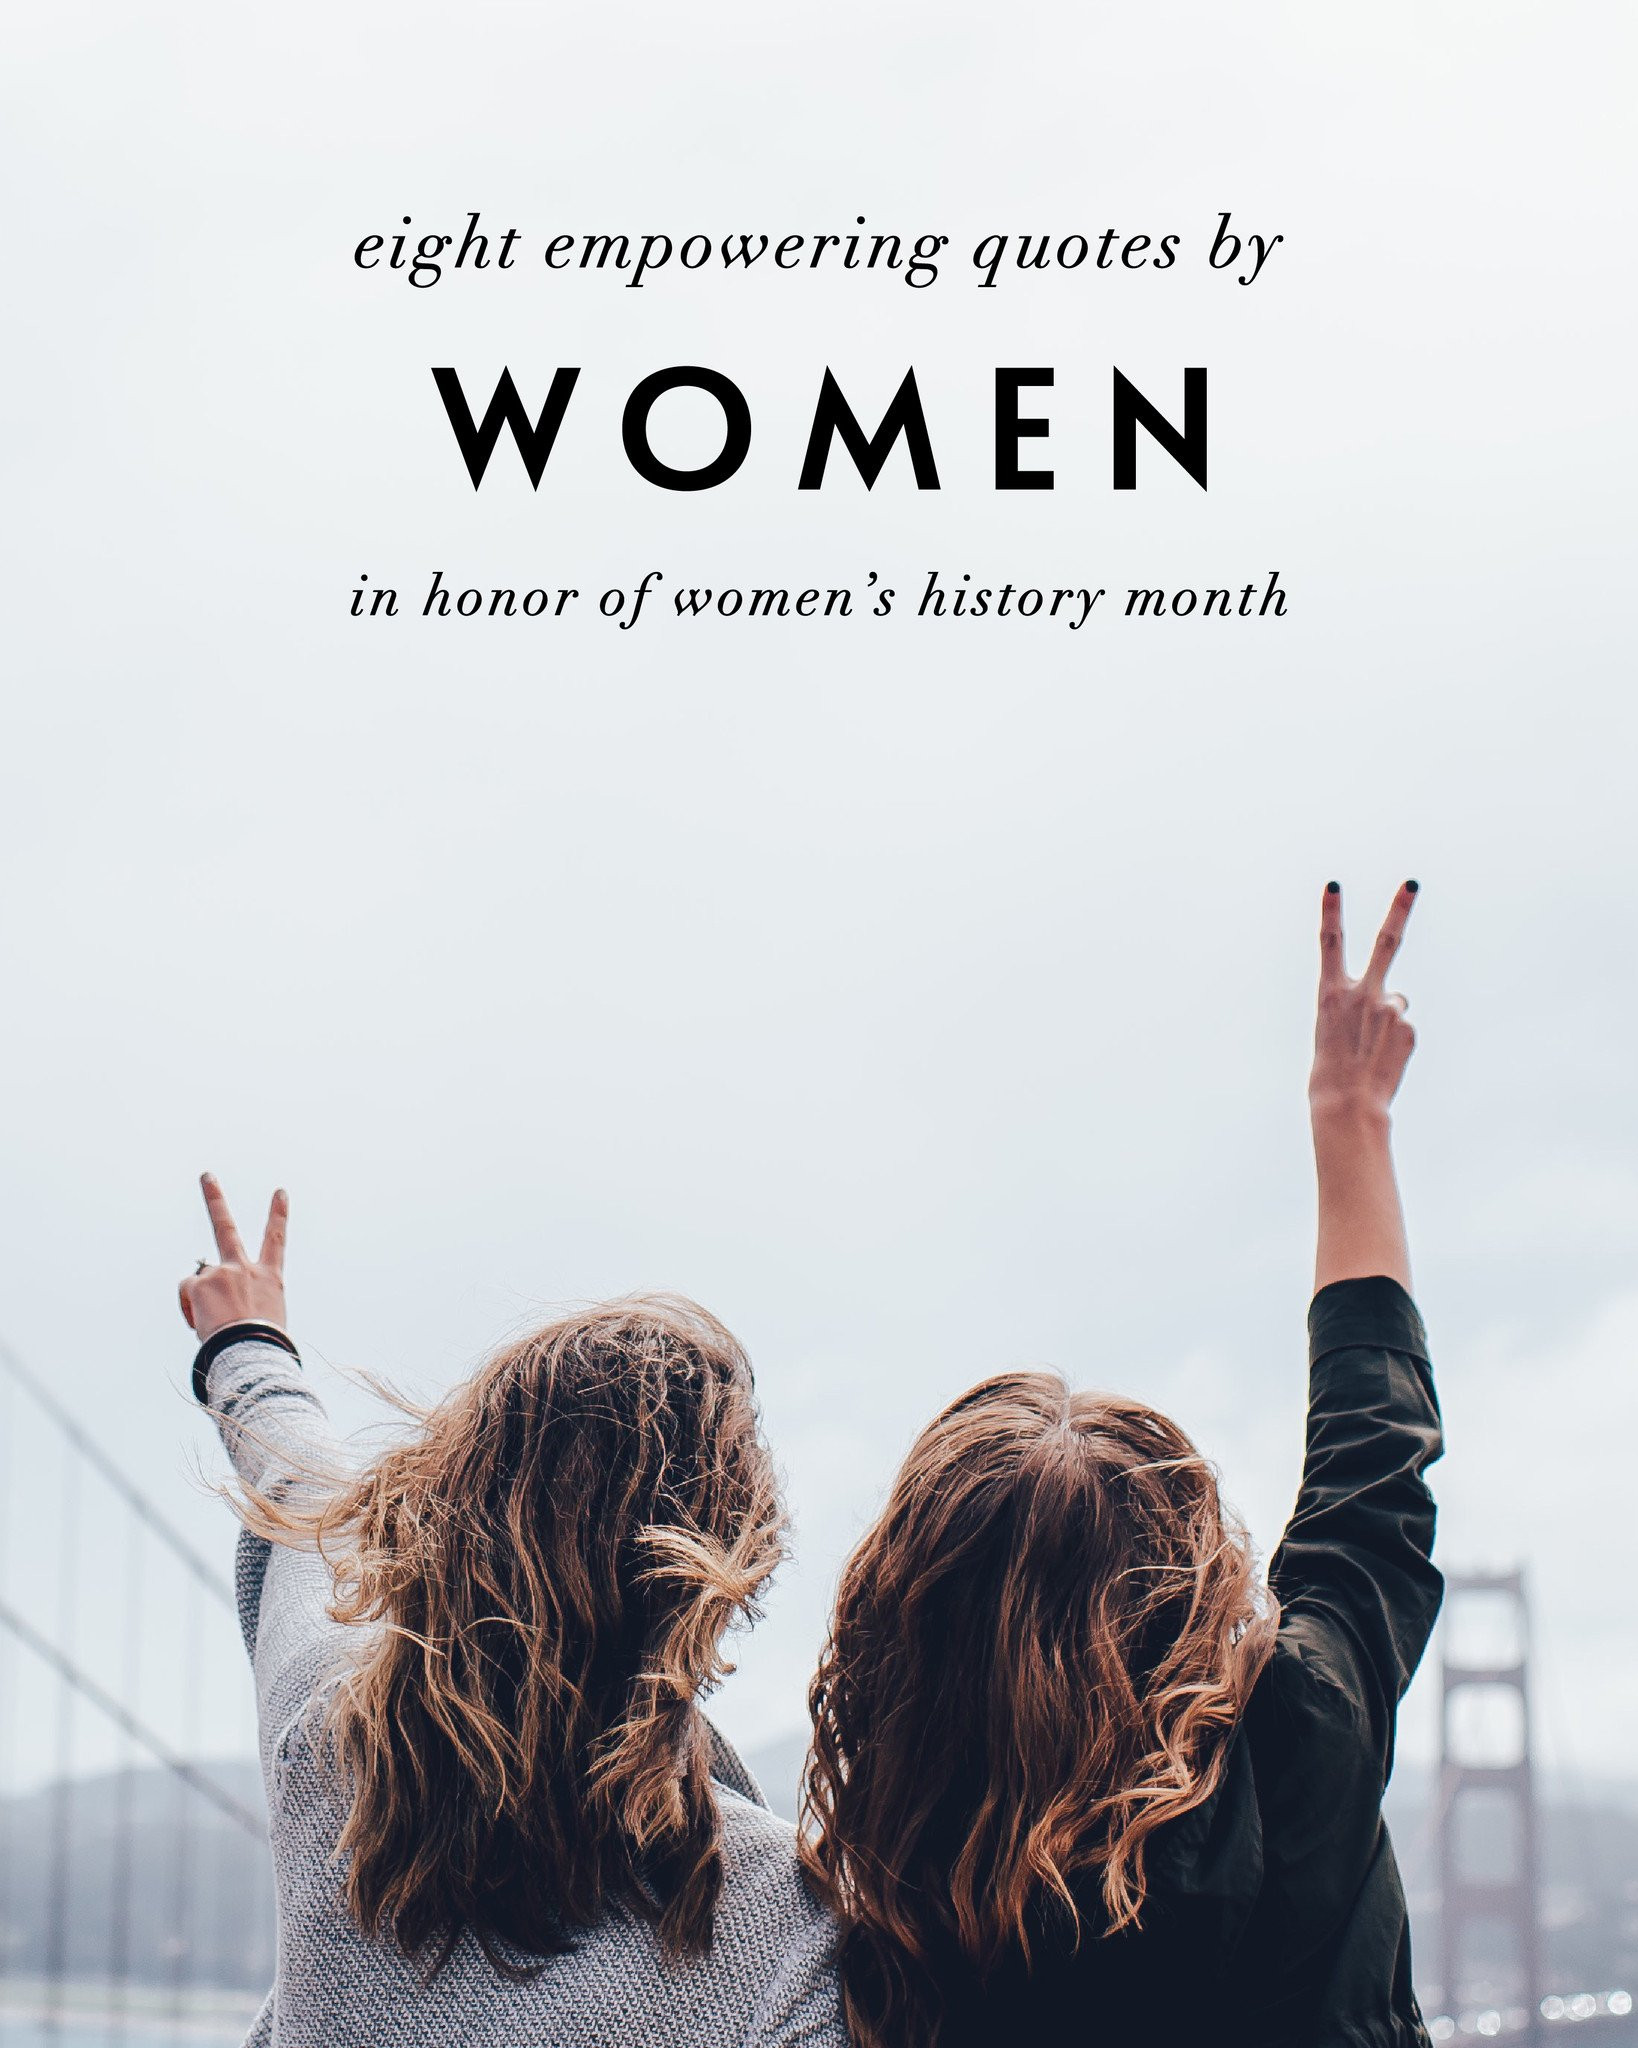 Positive Women Quotes
 8 Empowering Quotes By Women